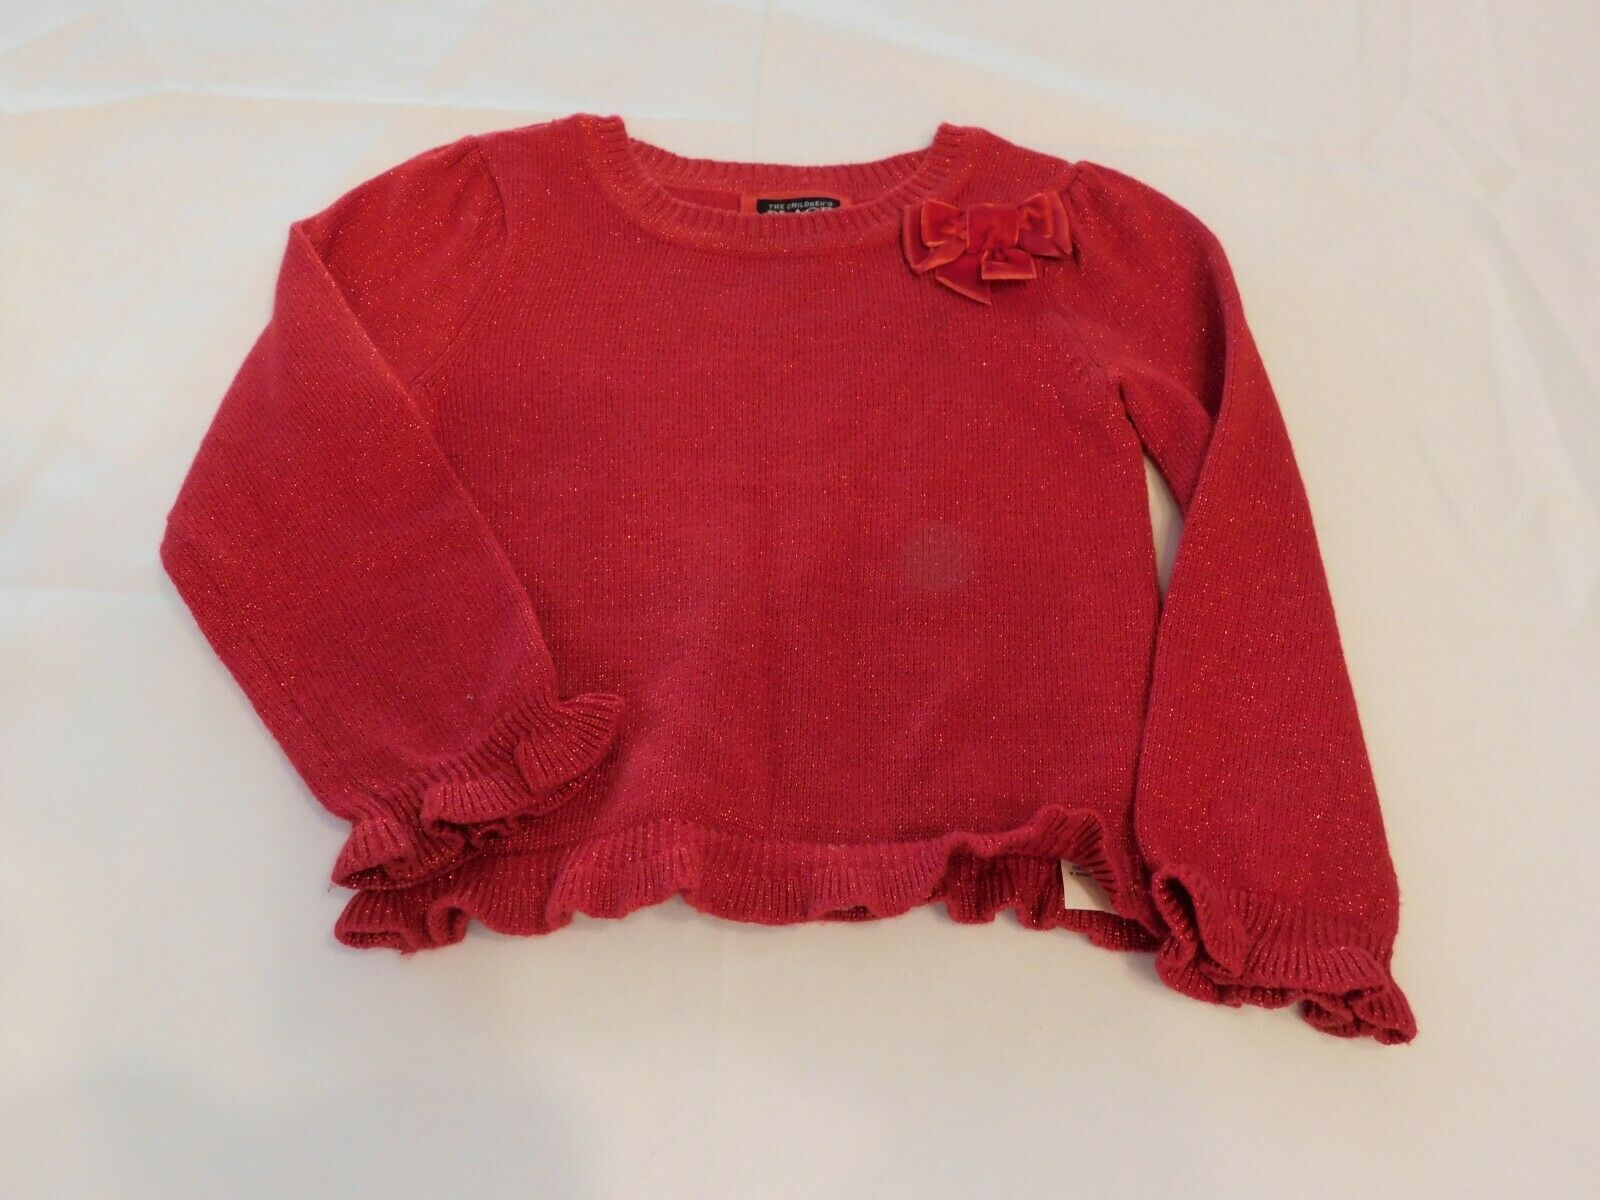 Primary image for The Children's Place Baby Girl's Long Sleeve Sweater Red Shimmer Size 18 Months